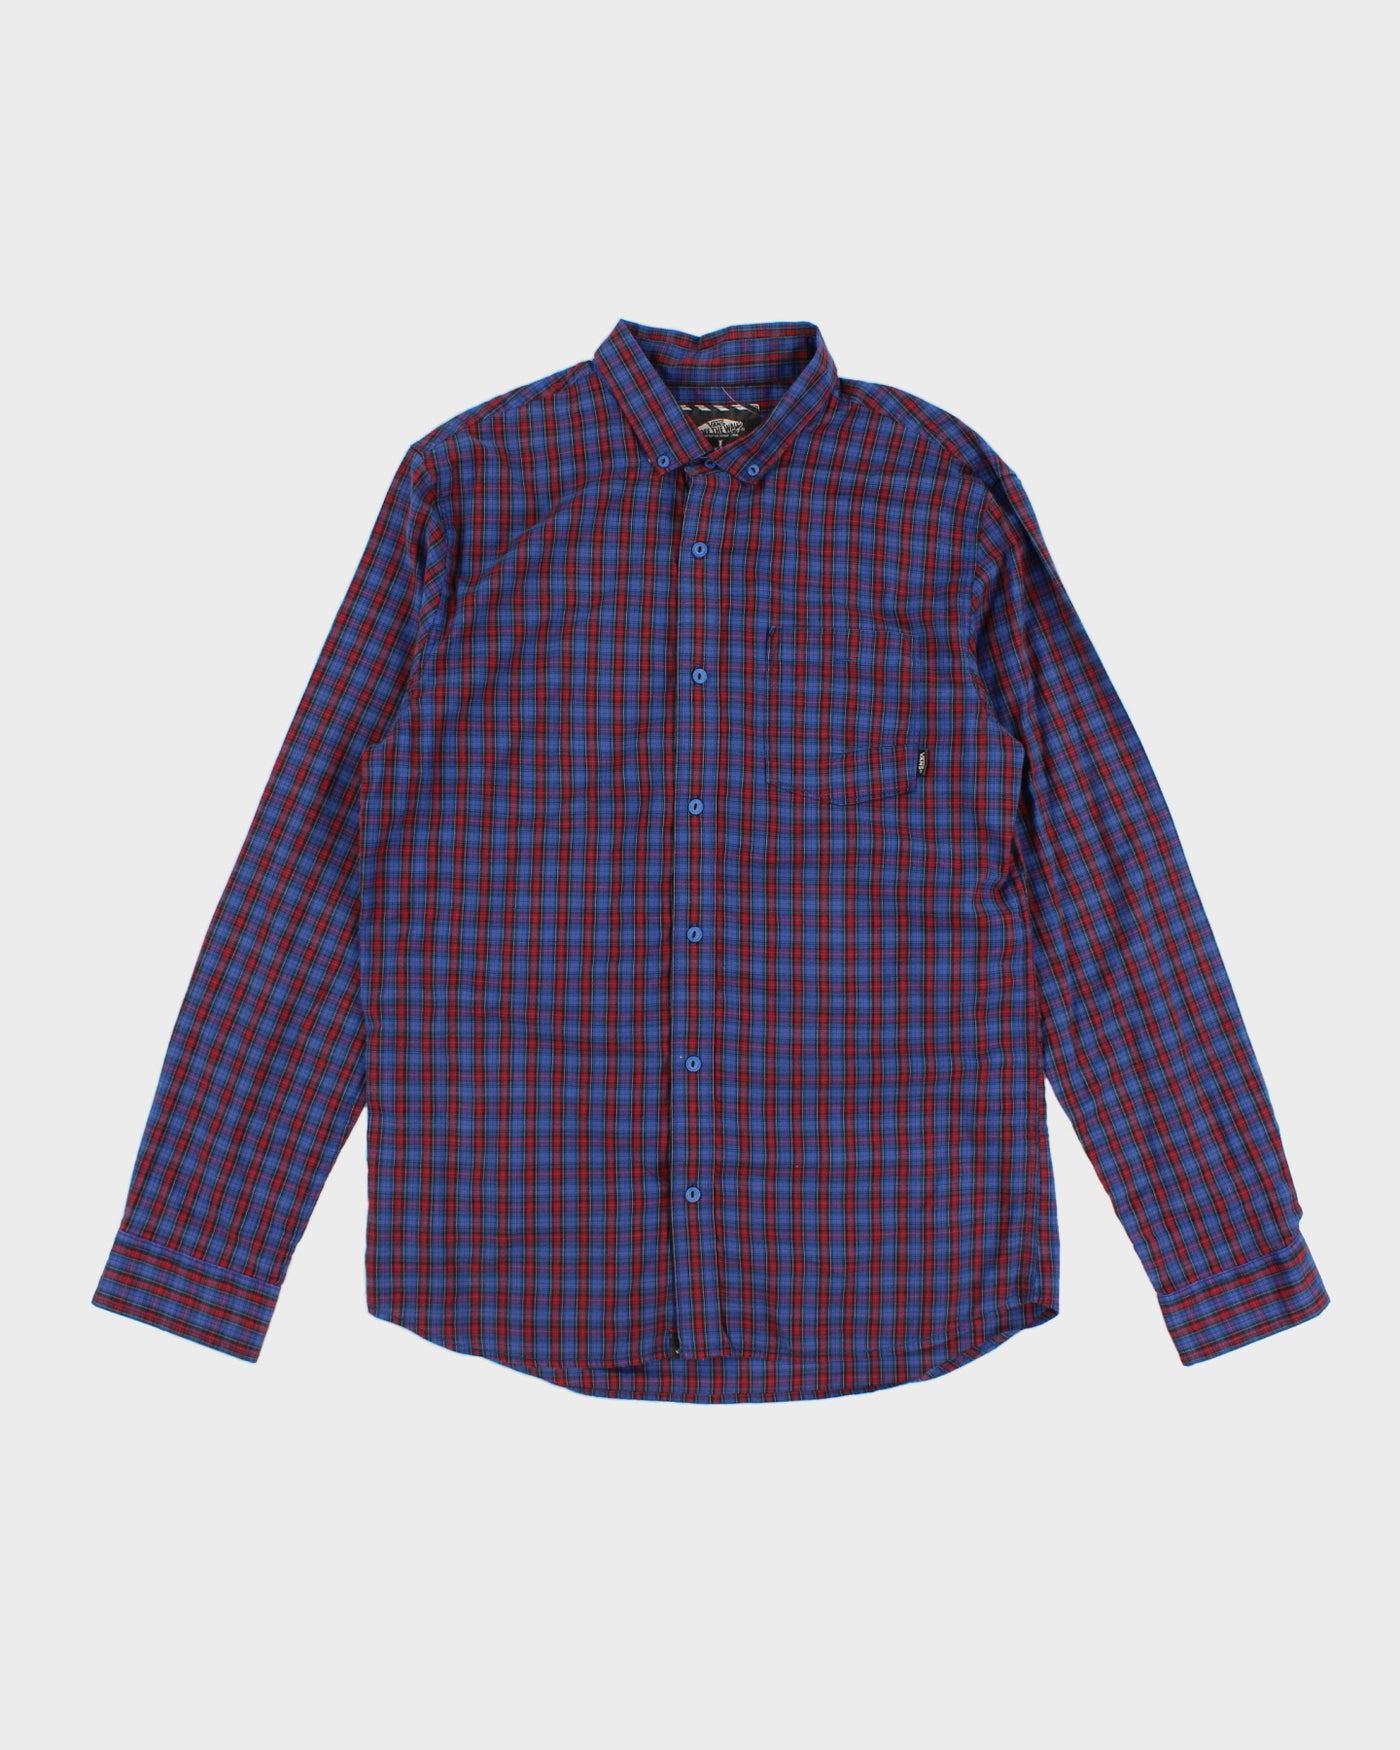 Blue and Red Check Vans Shirt - L